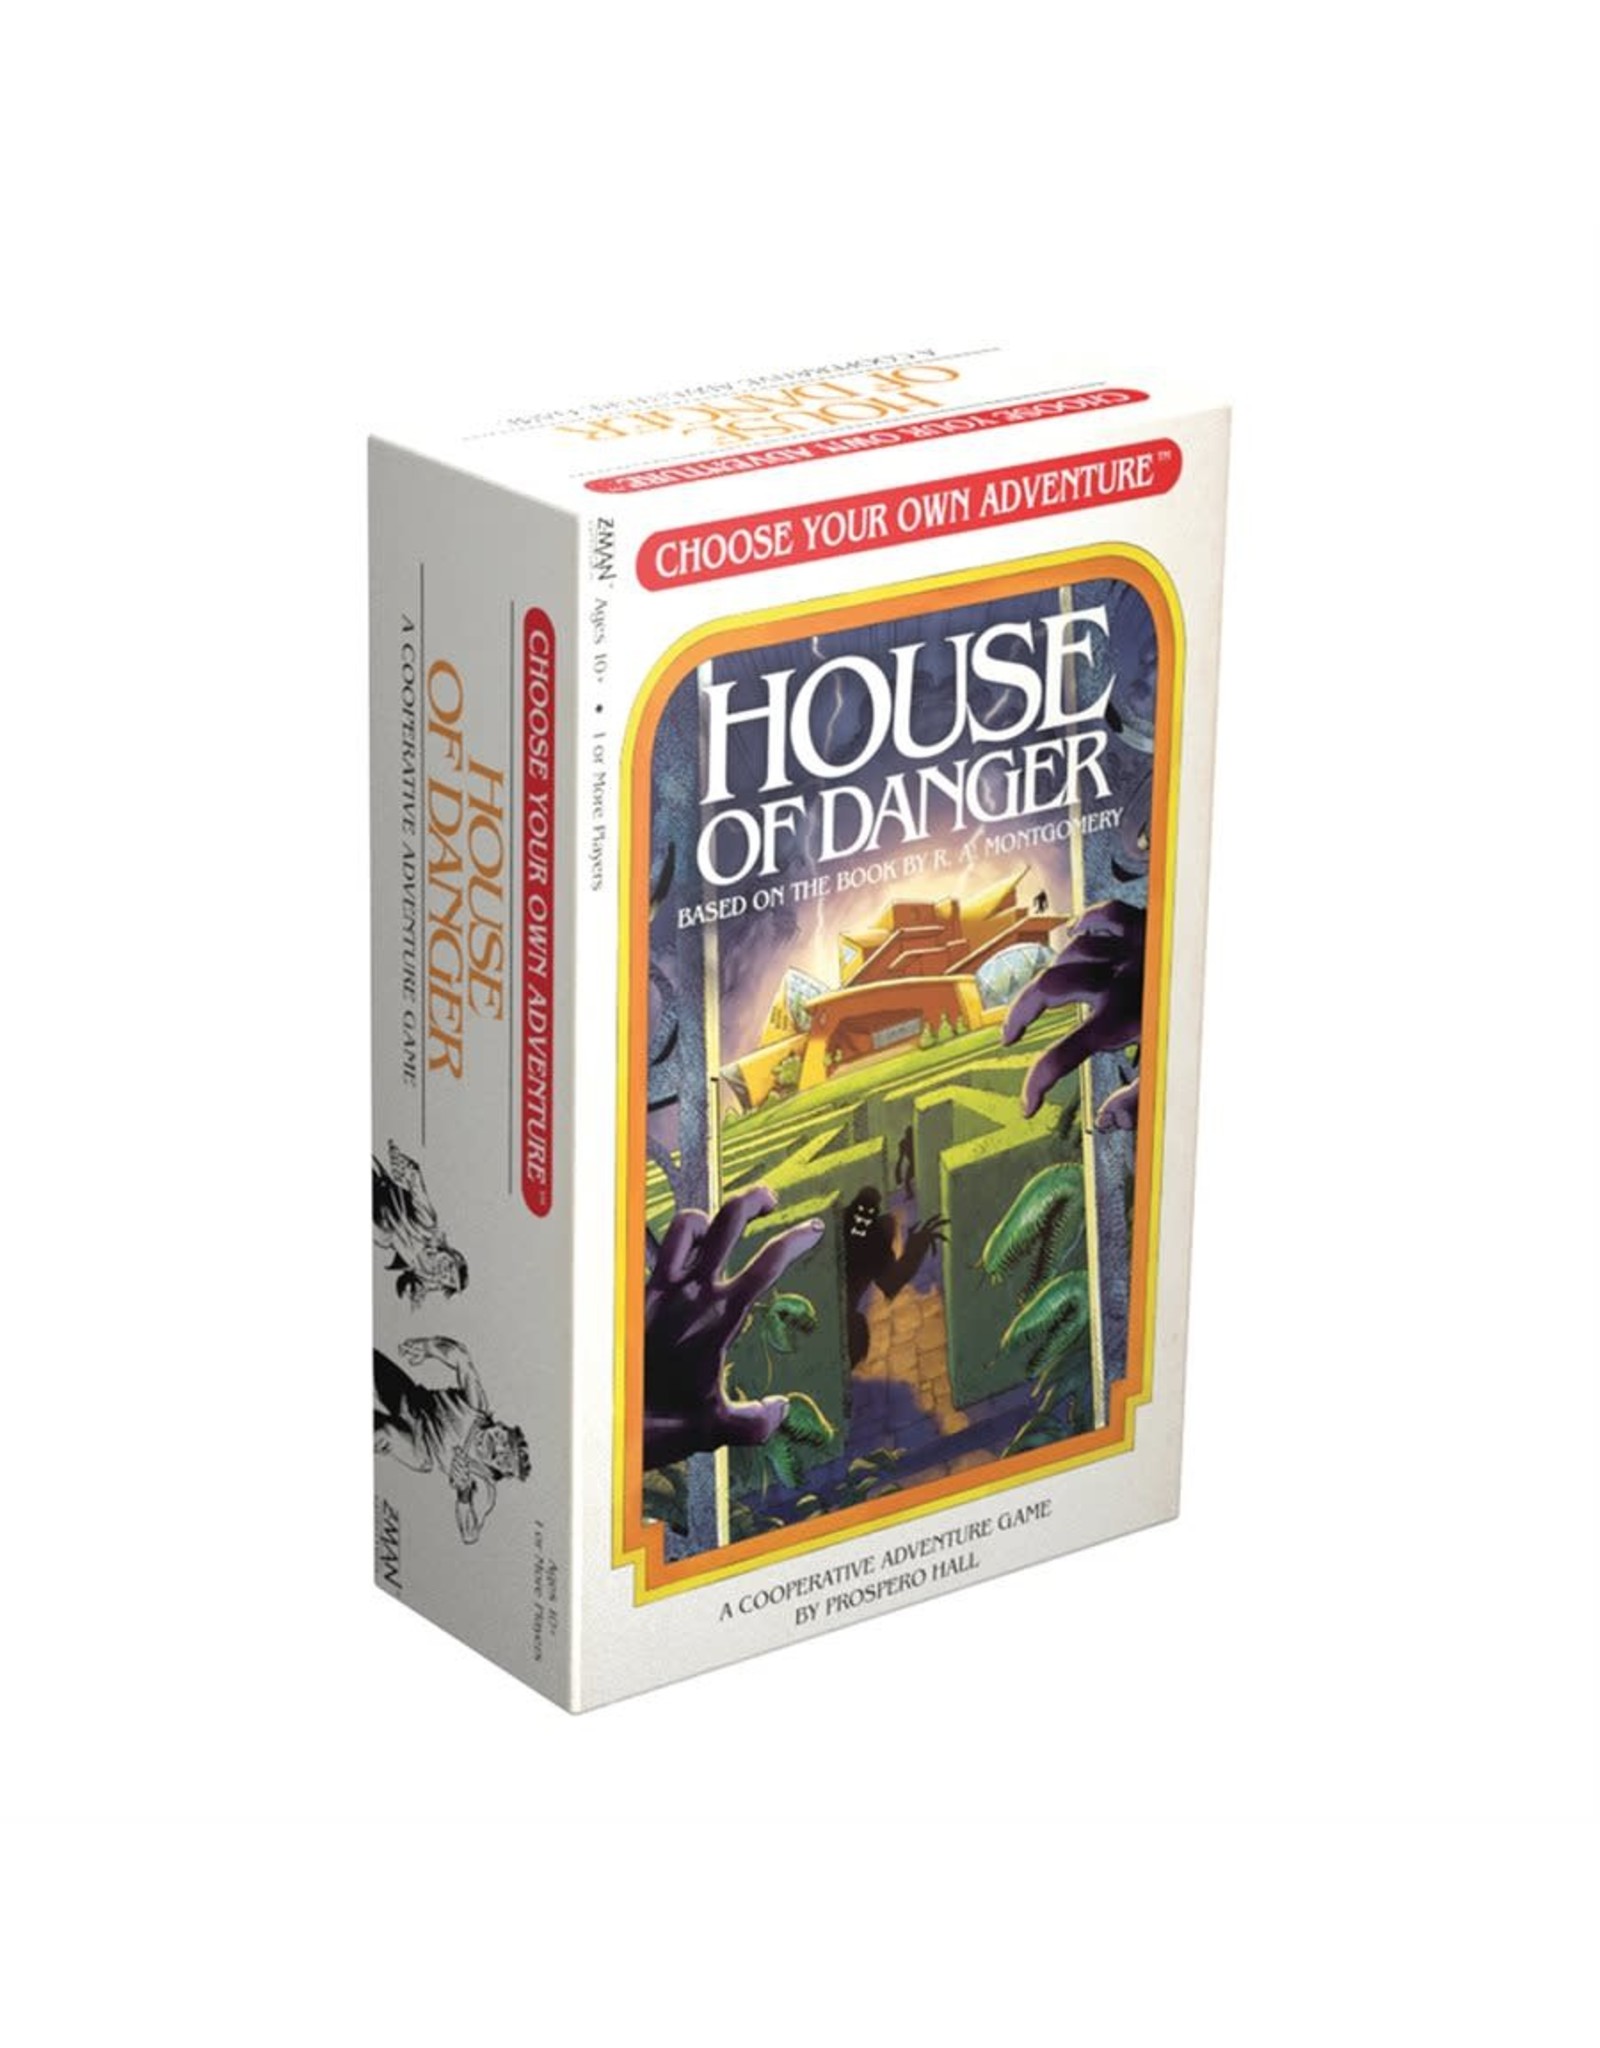 Choose Your Own Adventure : House Of Danger